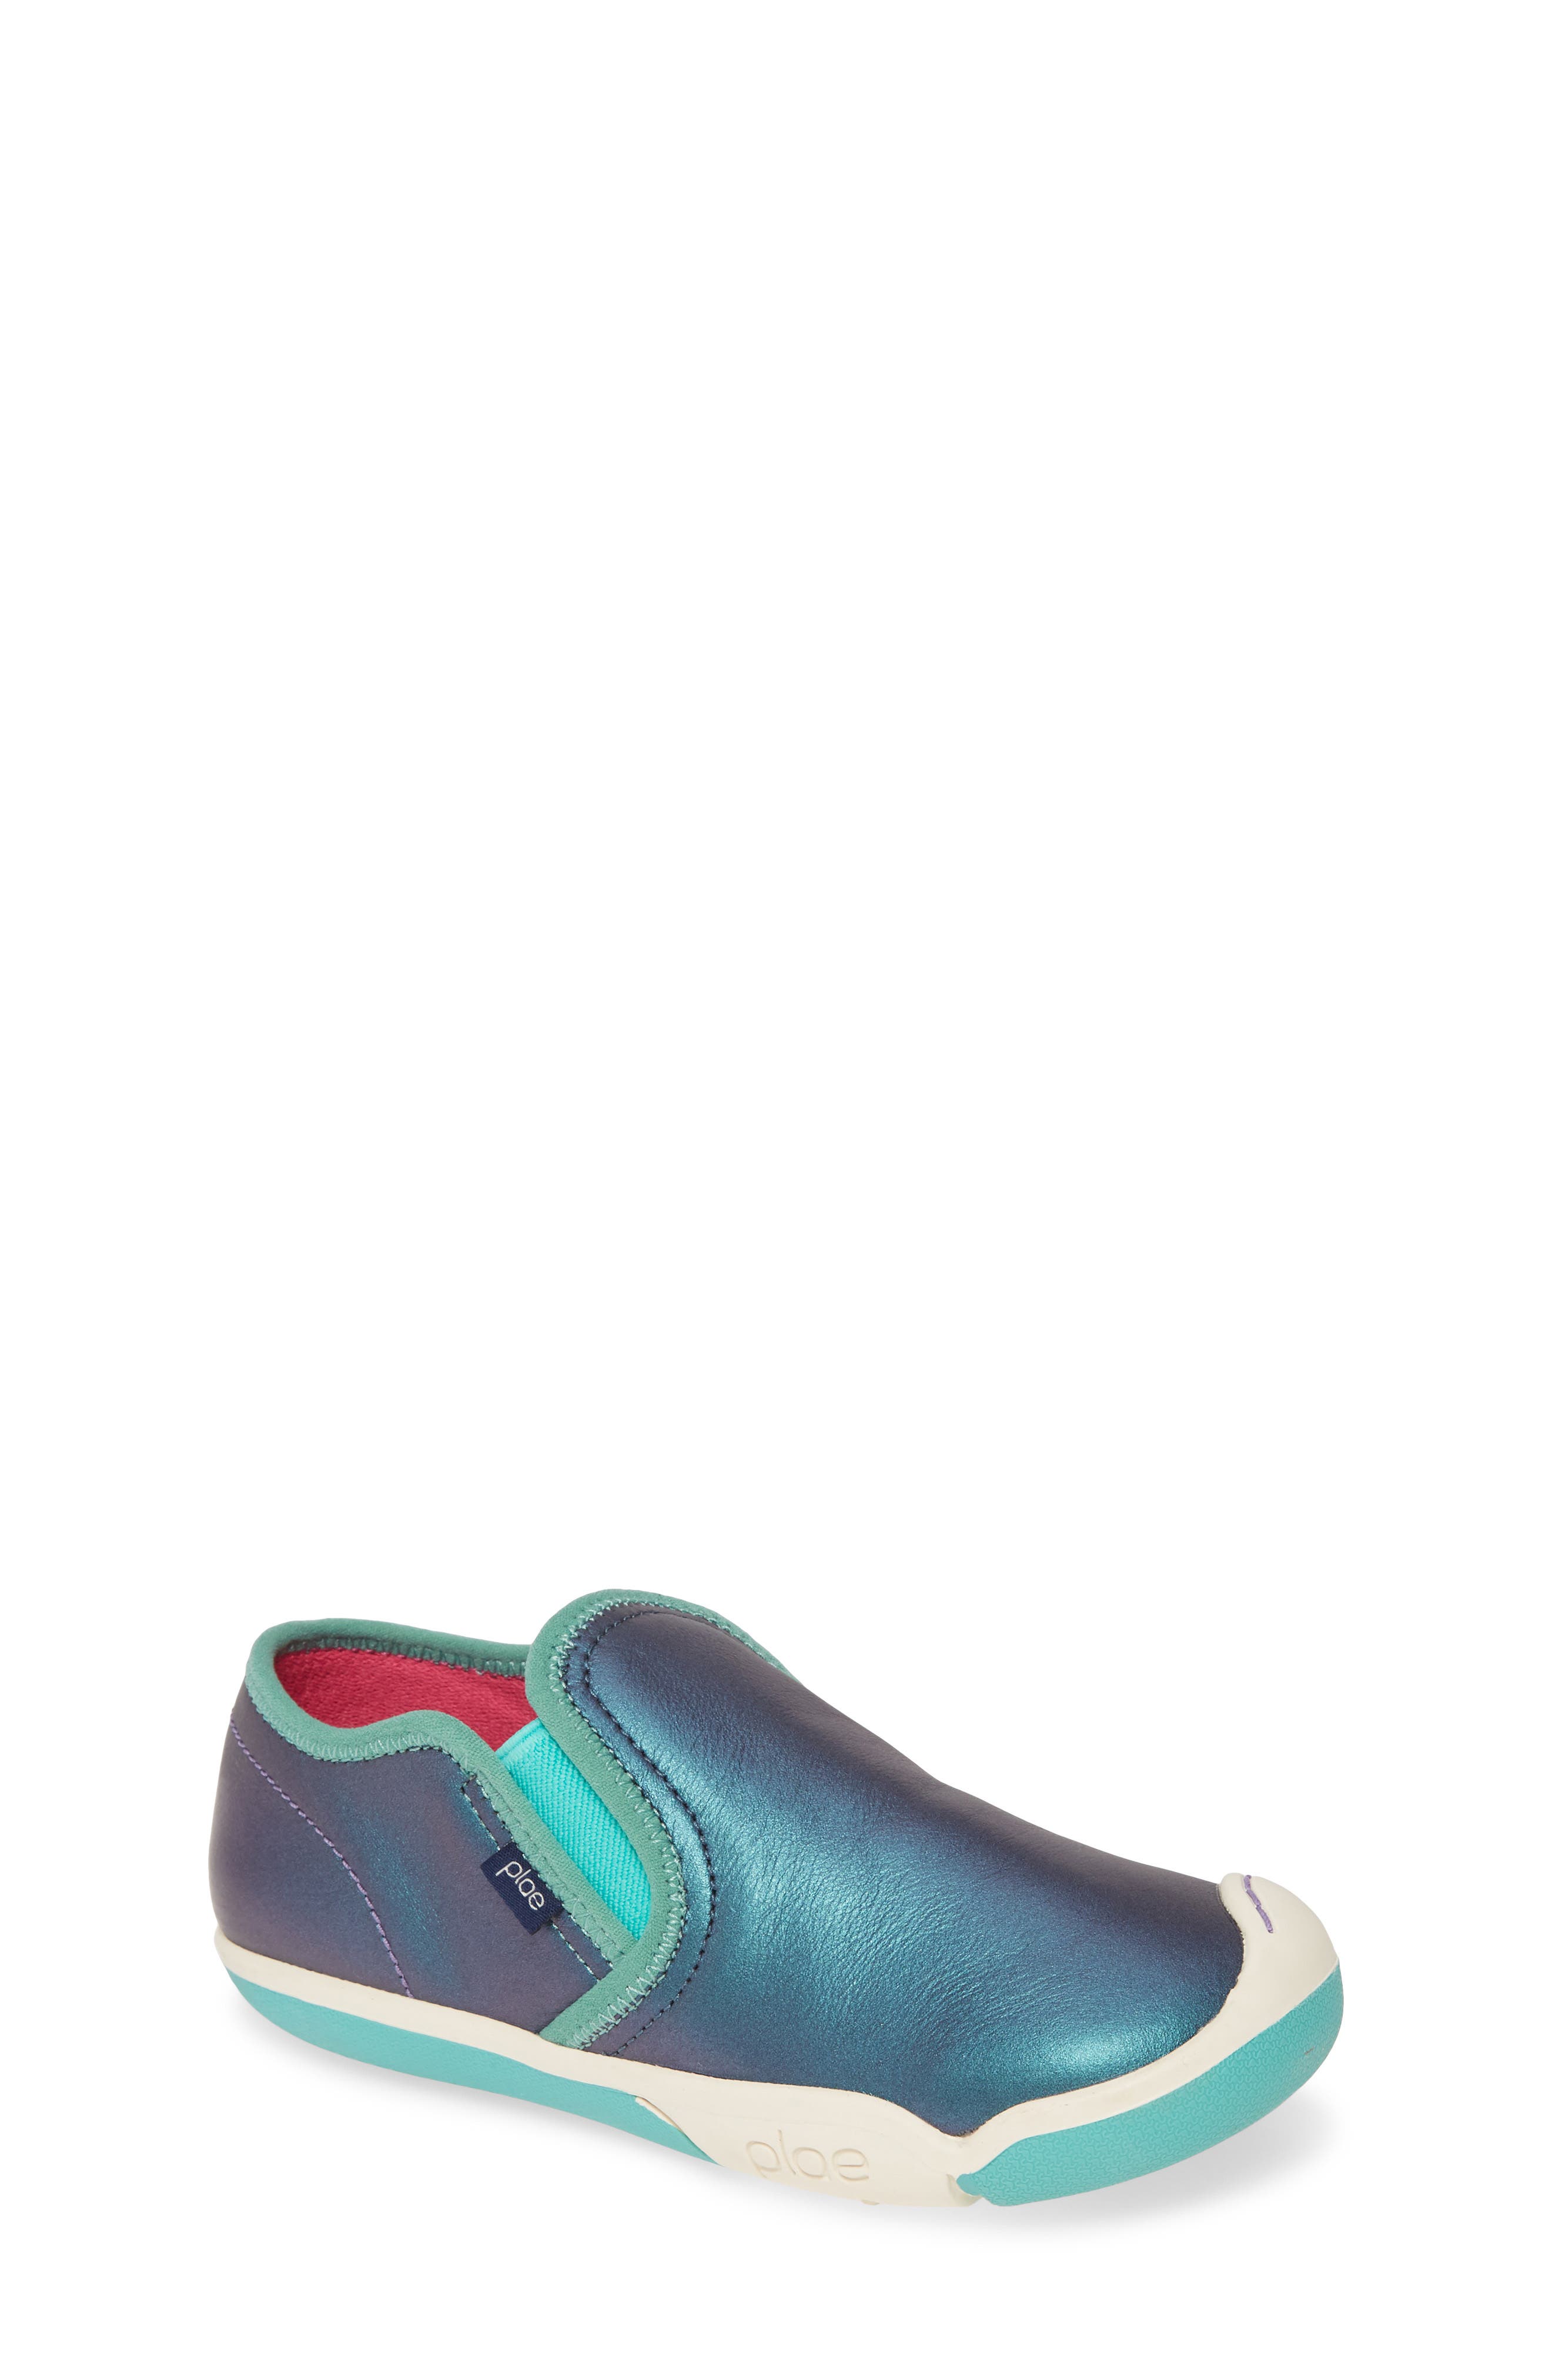 plae slip on shoes